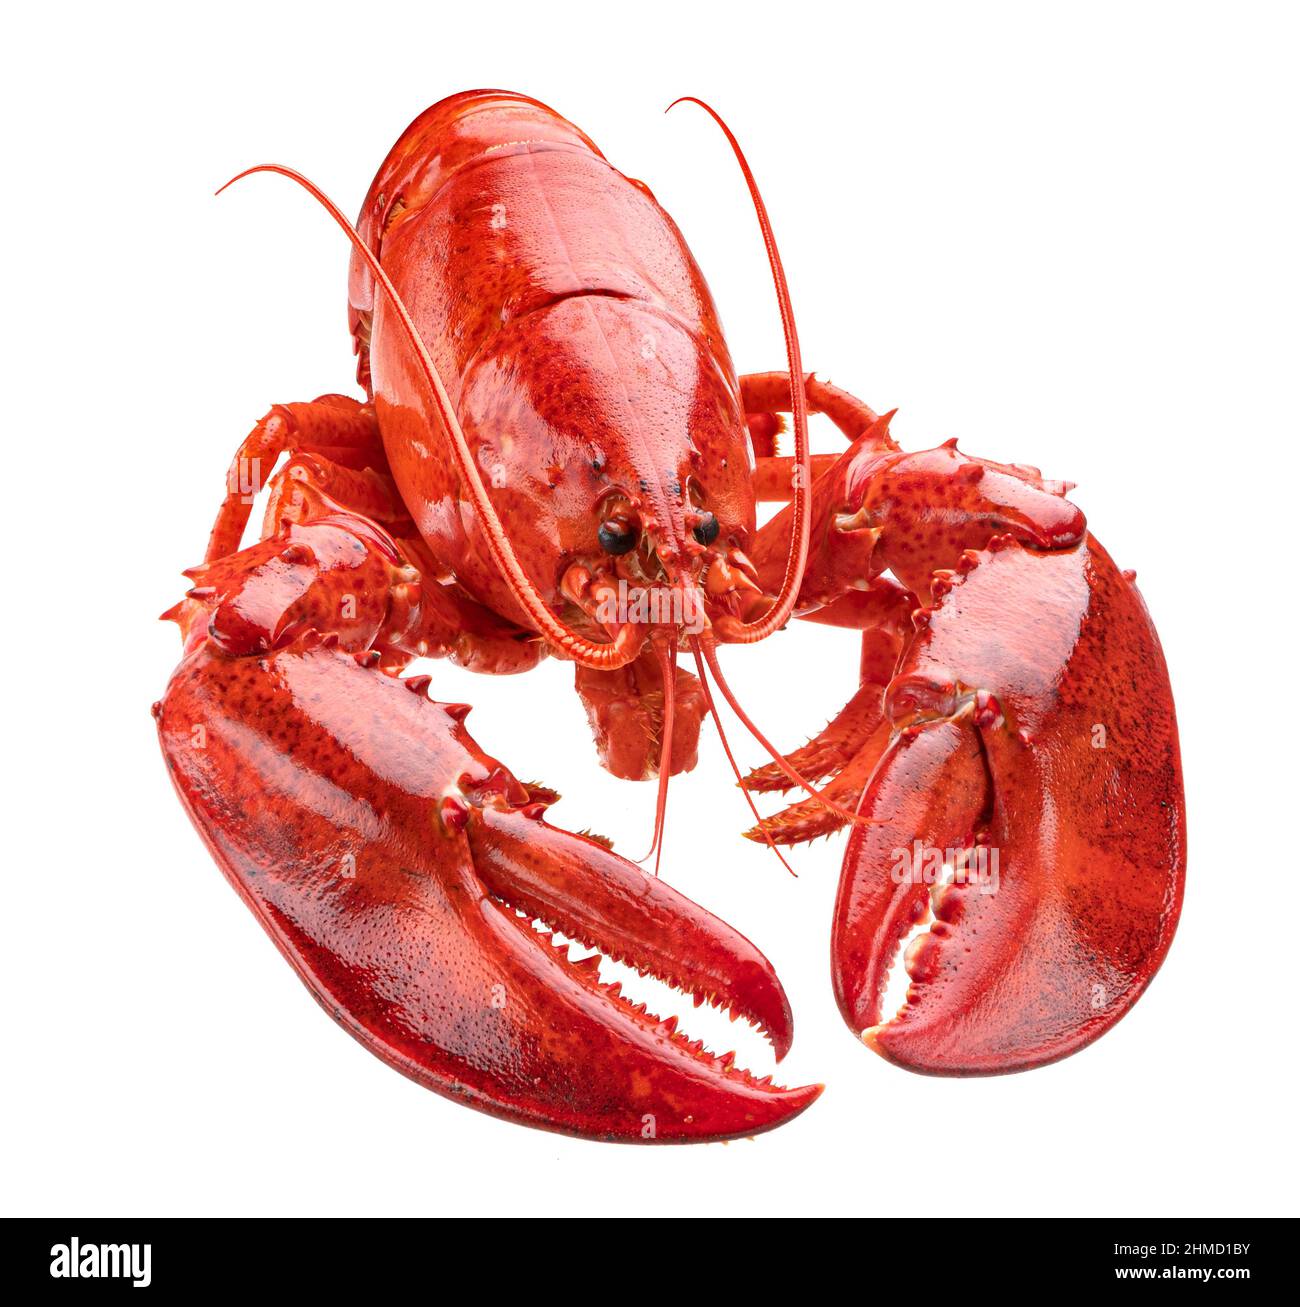 Cooked lobster isolated on white background, full depth of field Stock Photo